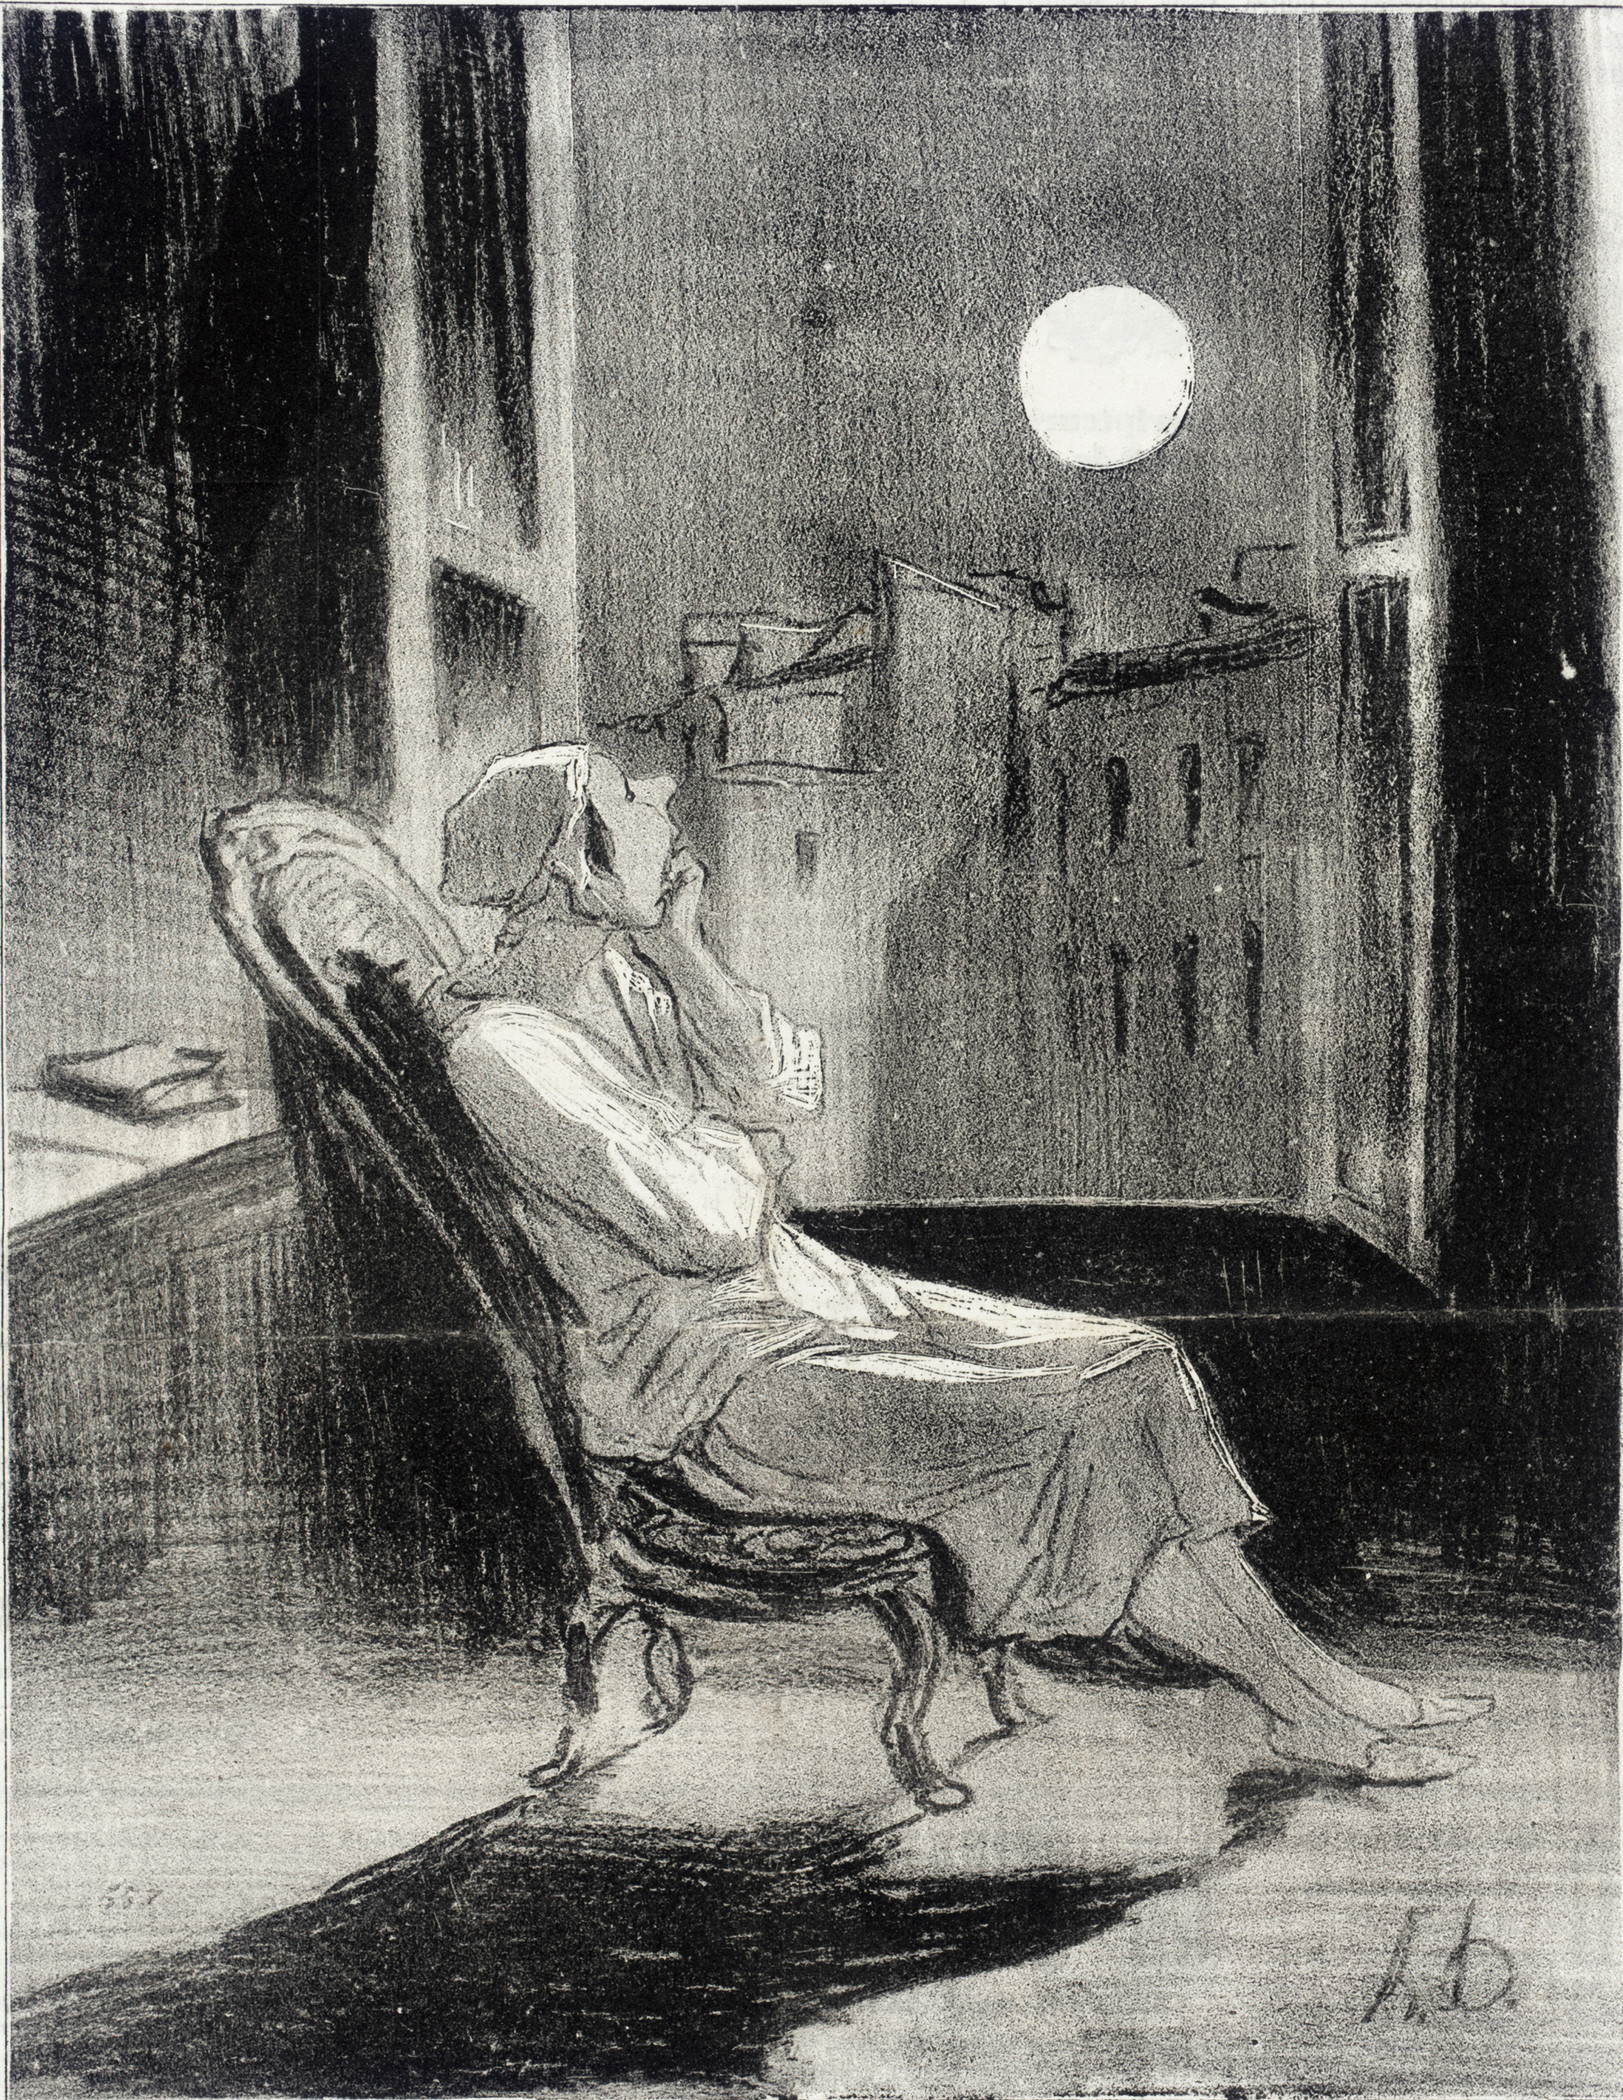 Honoré Daumier, O Lune!...inspire-moi ce soir quelque petite pensée..., 1844, Los Angeles County Museum of Art, gift of Mrs. Florence Victor from The David and Florence Victor Collection, photo © Museum Associates/LACMA